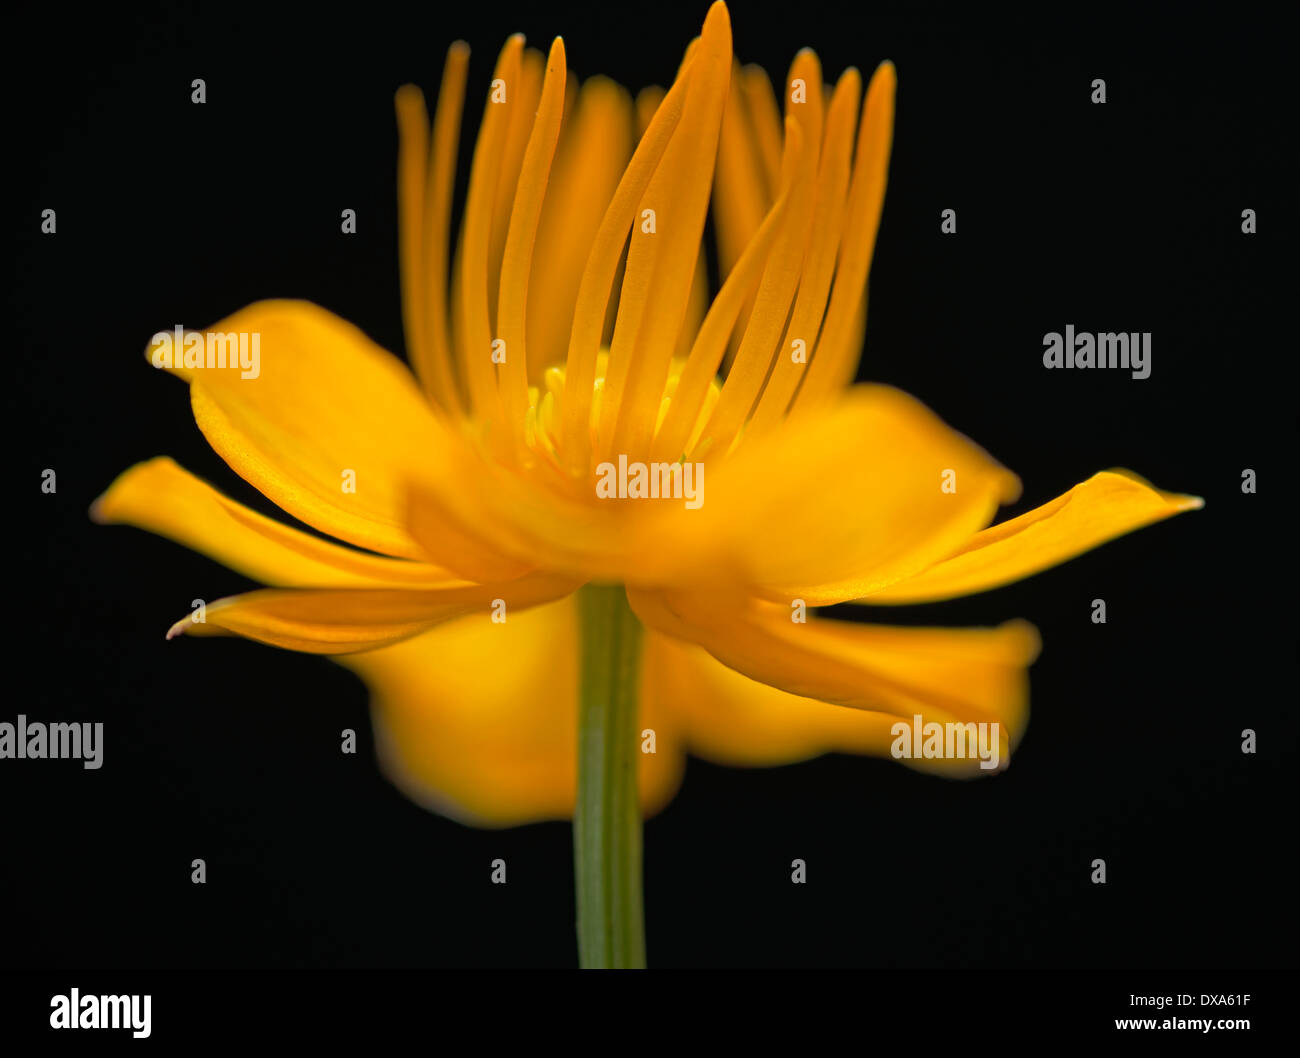 Globeflower, Trollius chinensis, yellow flower showing stamens and stigma, against a solid black background. Stock Photo